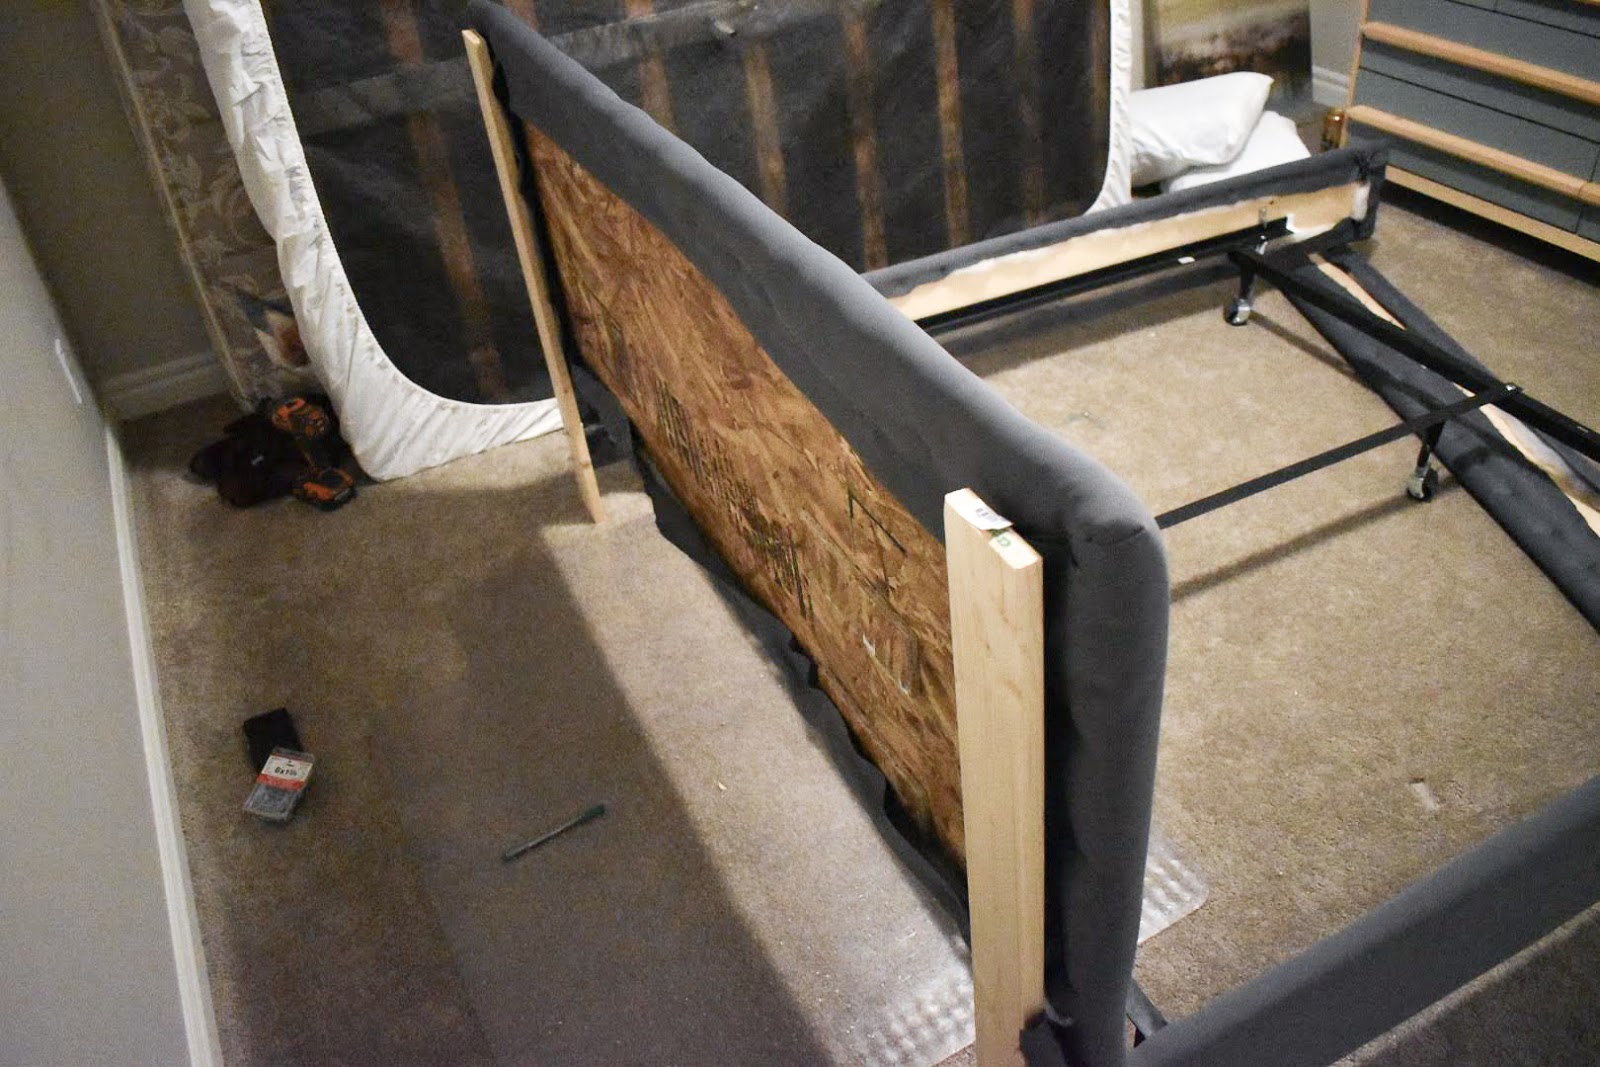 Metal Bed Frame Into An Upholstered, How To Attach Headboard Metal Frame Without Holes